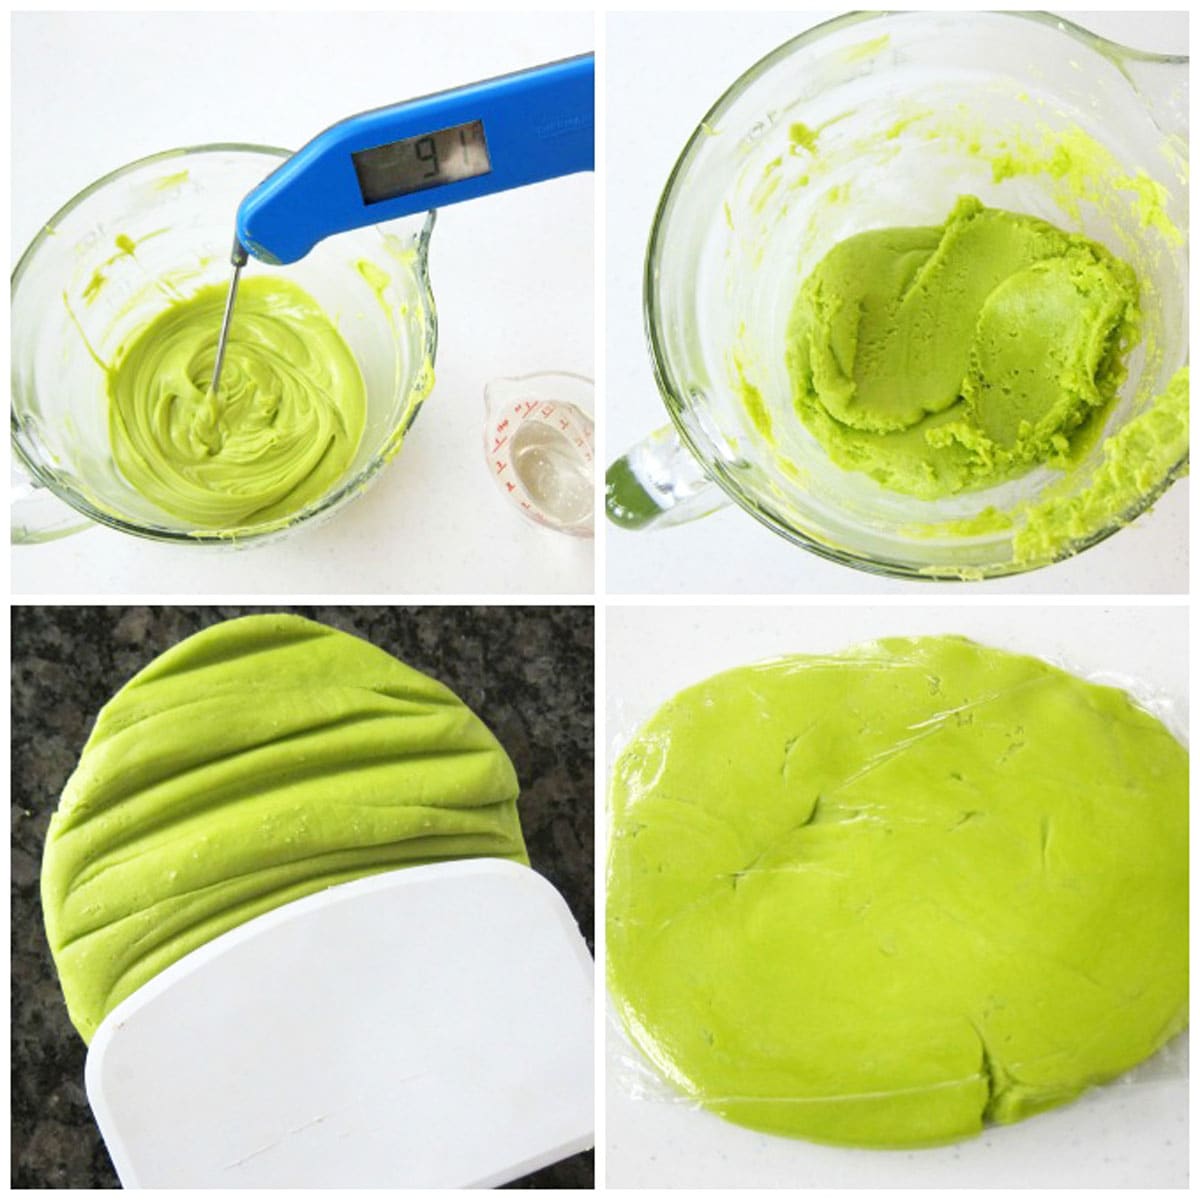 melted green candy melts at 91 degrees Fahrenheit mixed with corn syrup into candy clay.